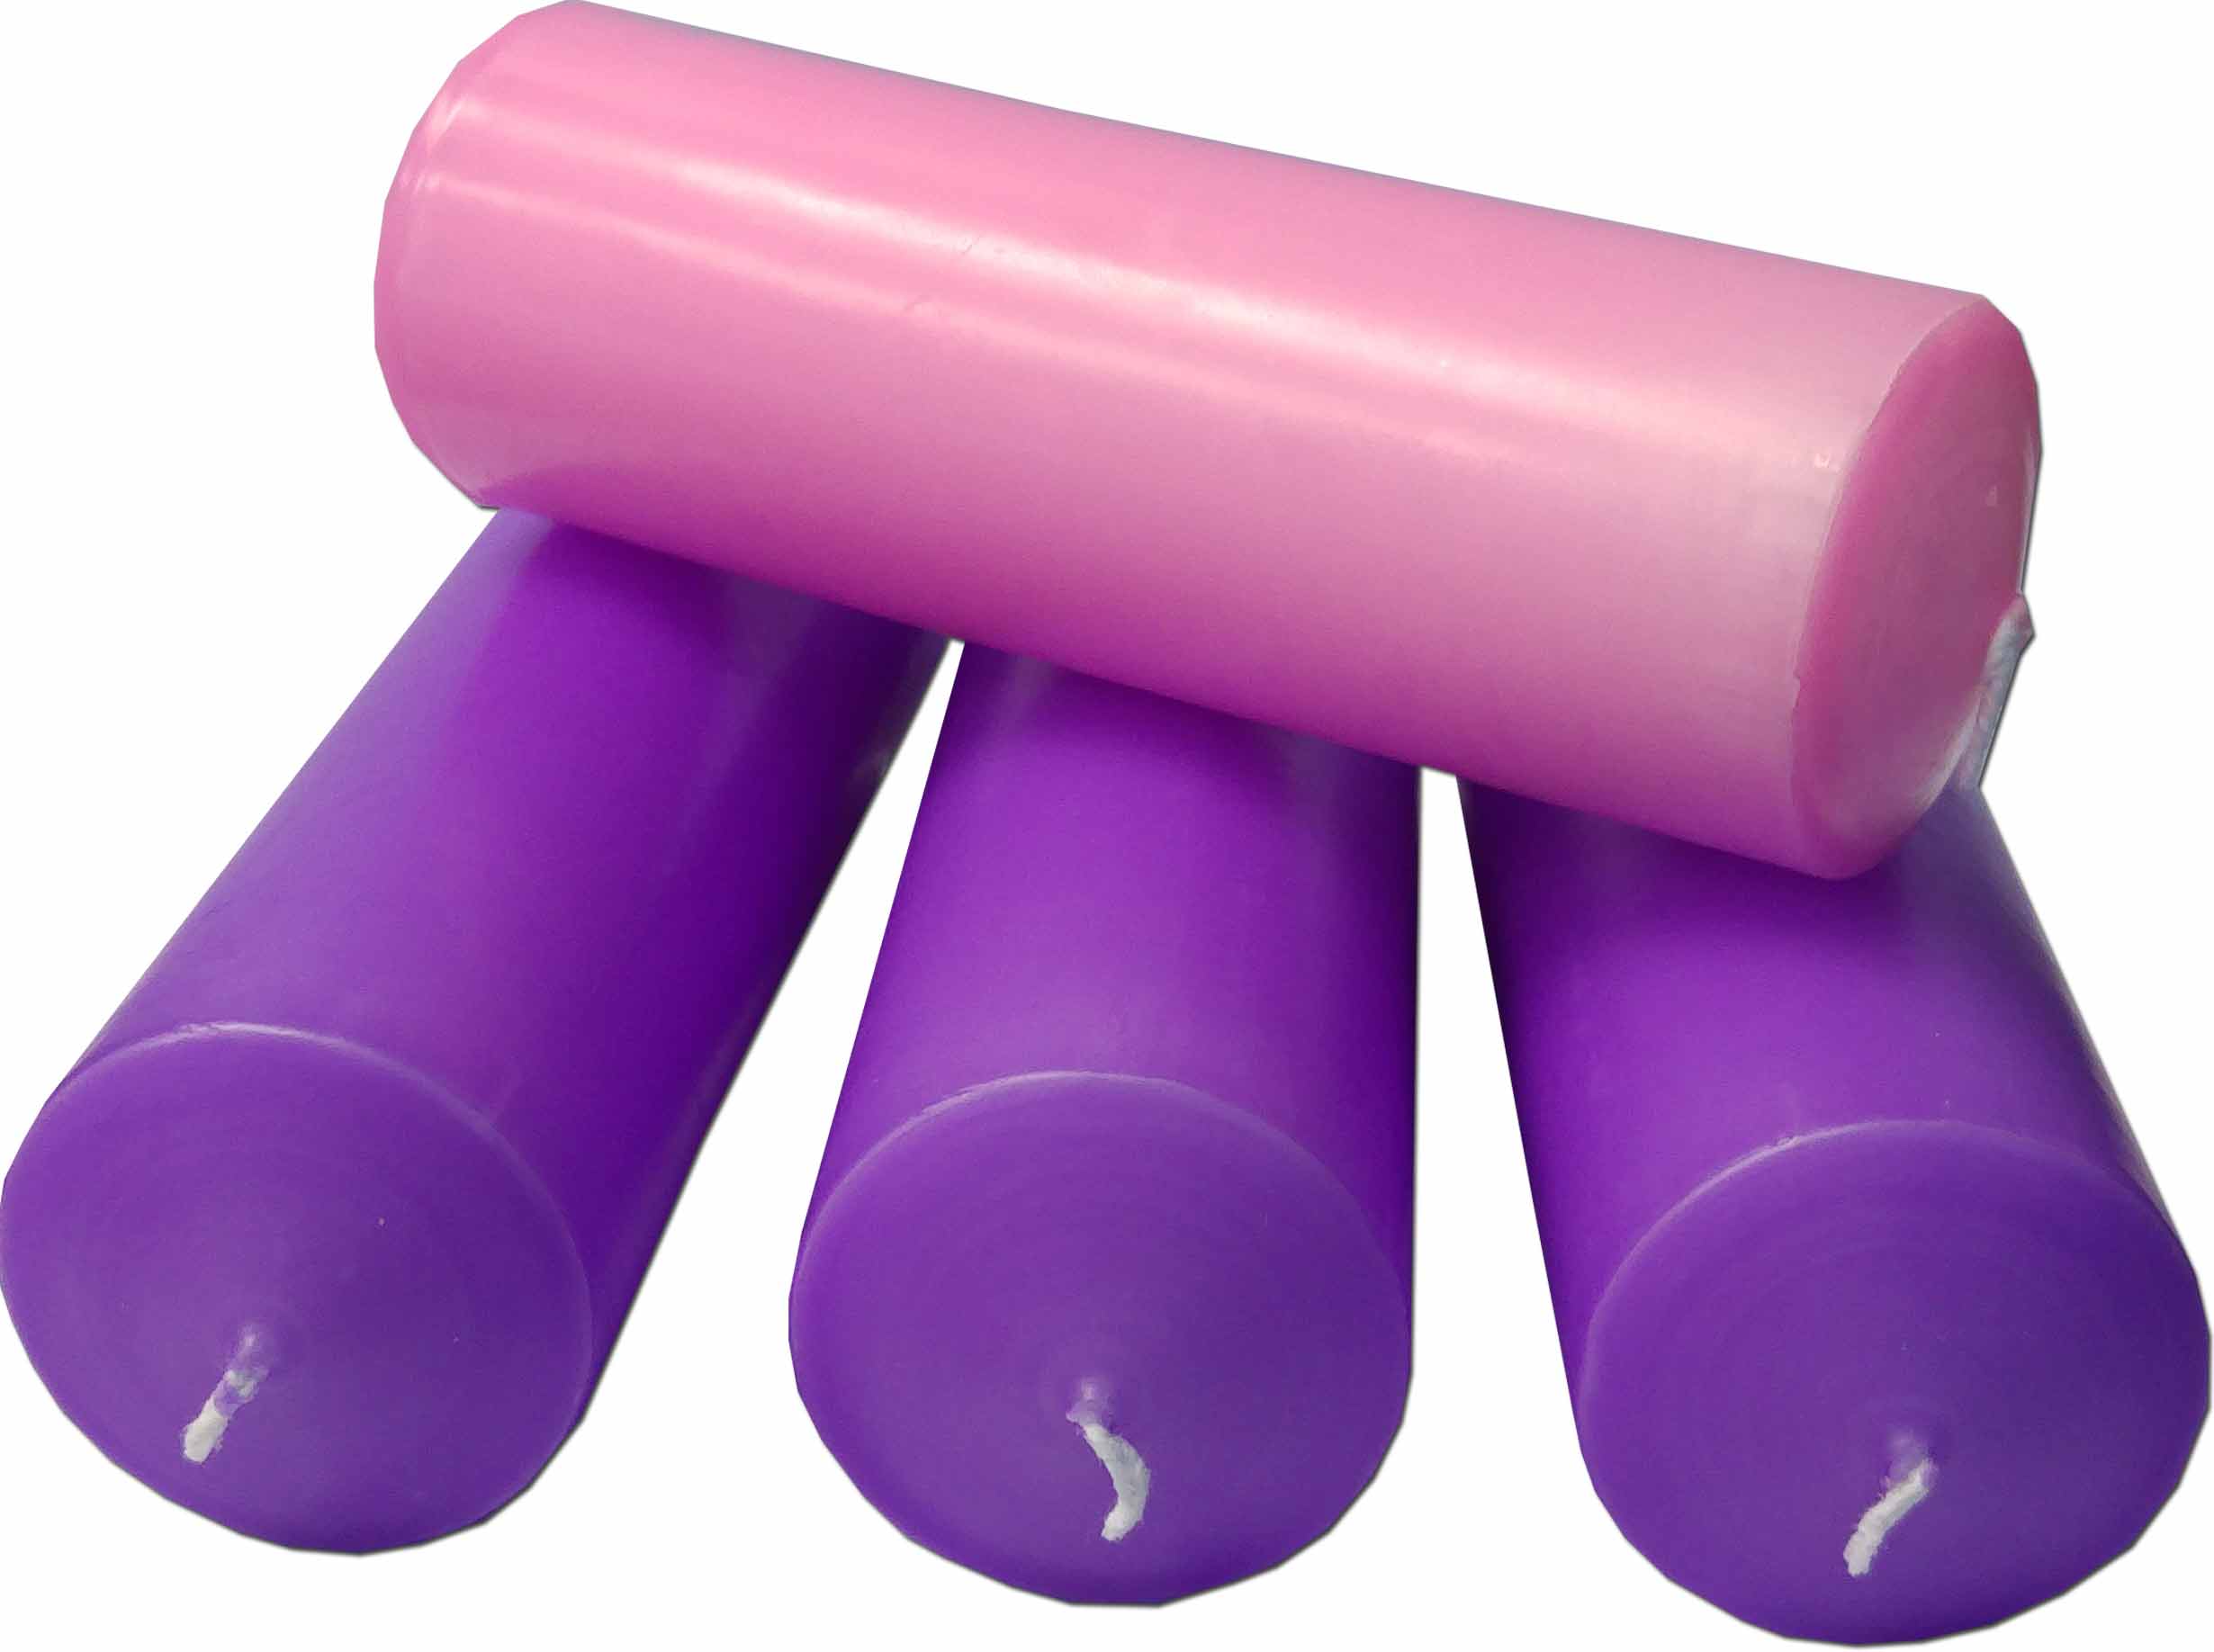 Advent candles for sale | Pink and purple candles